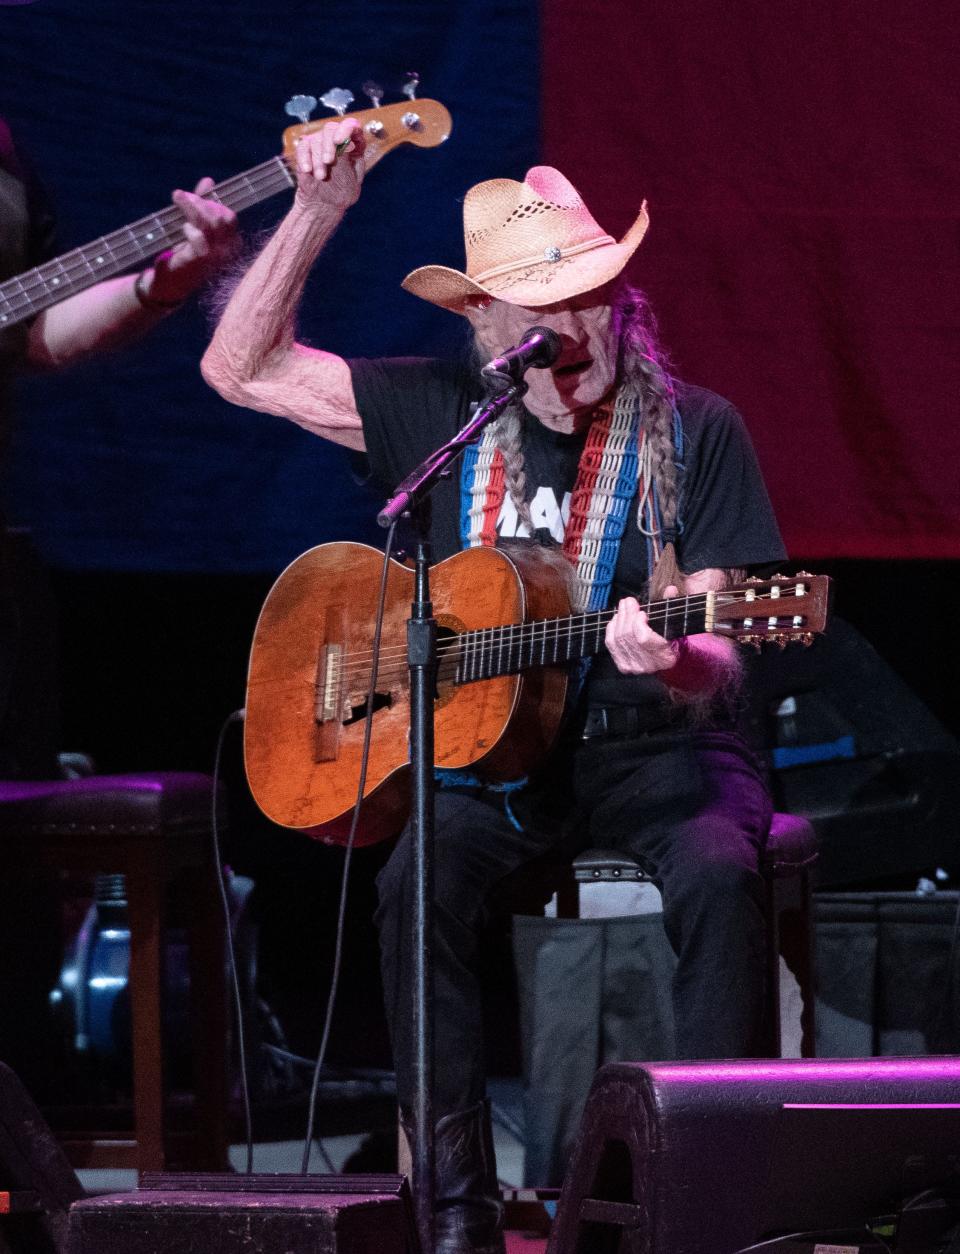 Legendary country musician Willie Nelson performs at the Tuscaloosa Amphitheater Friday, April 22, 2022, in Tuscaloosa, Alabama. Gary Cosby Jr./Tuscaloosa News